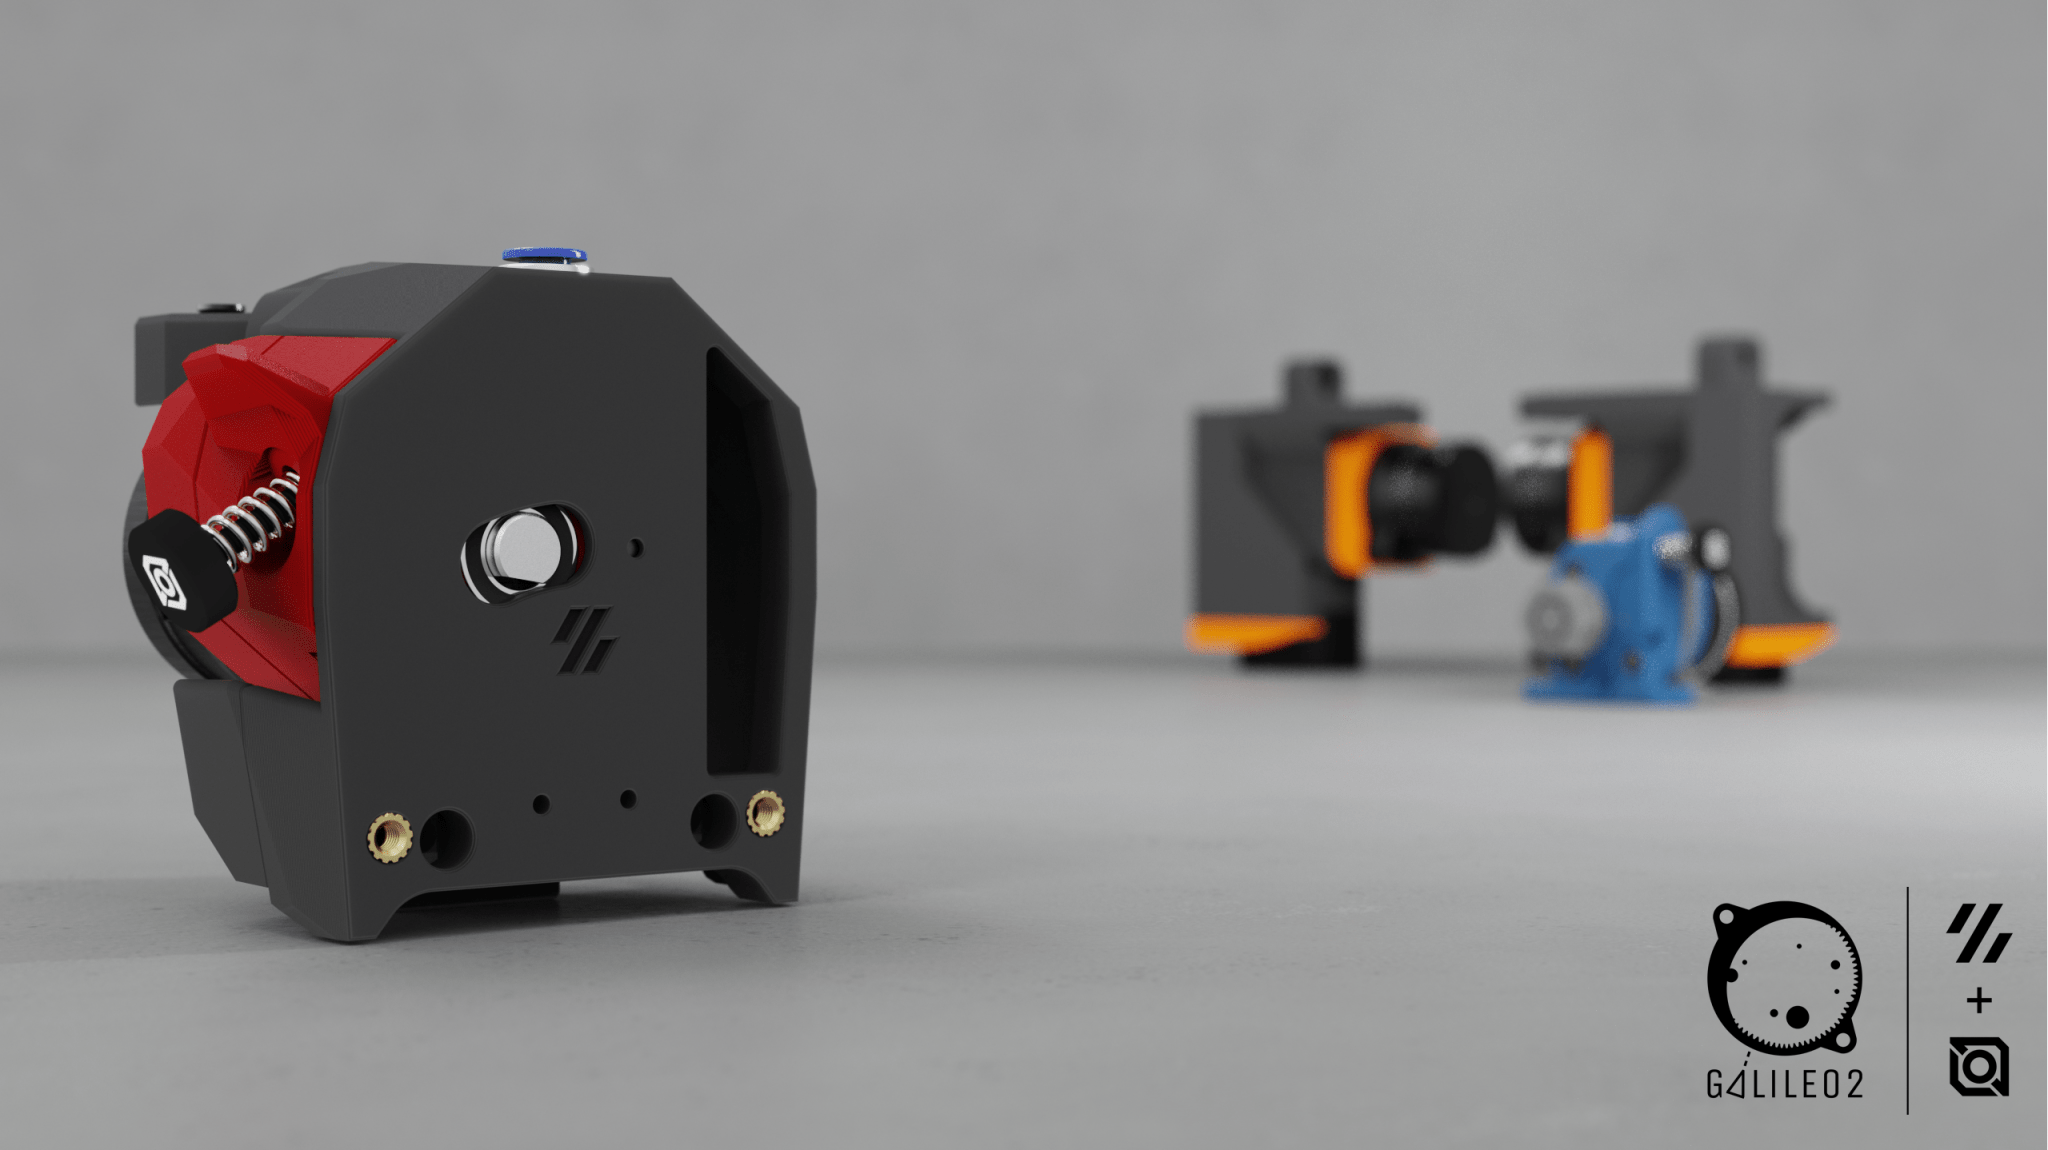 Galileo 2 Kit by JaredC01 (LDO Motors) - G2E and G2Z (Extruder and Z Drive Kits) - West3D Printing - LDO Motors